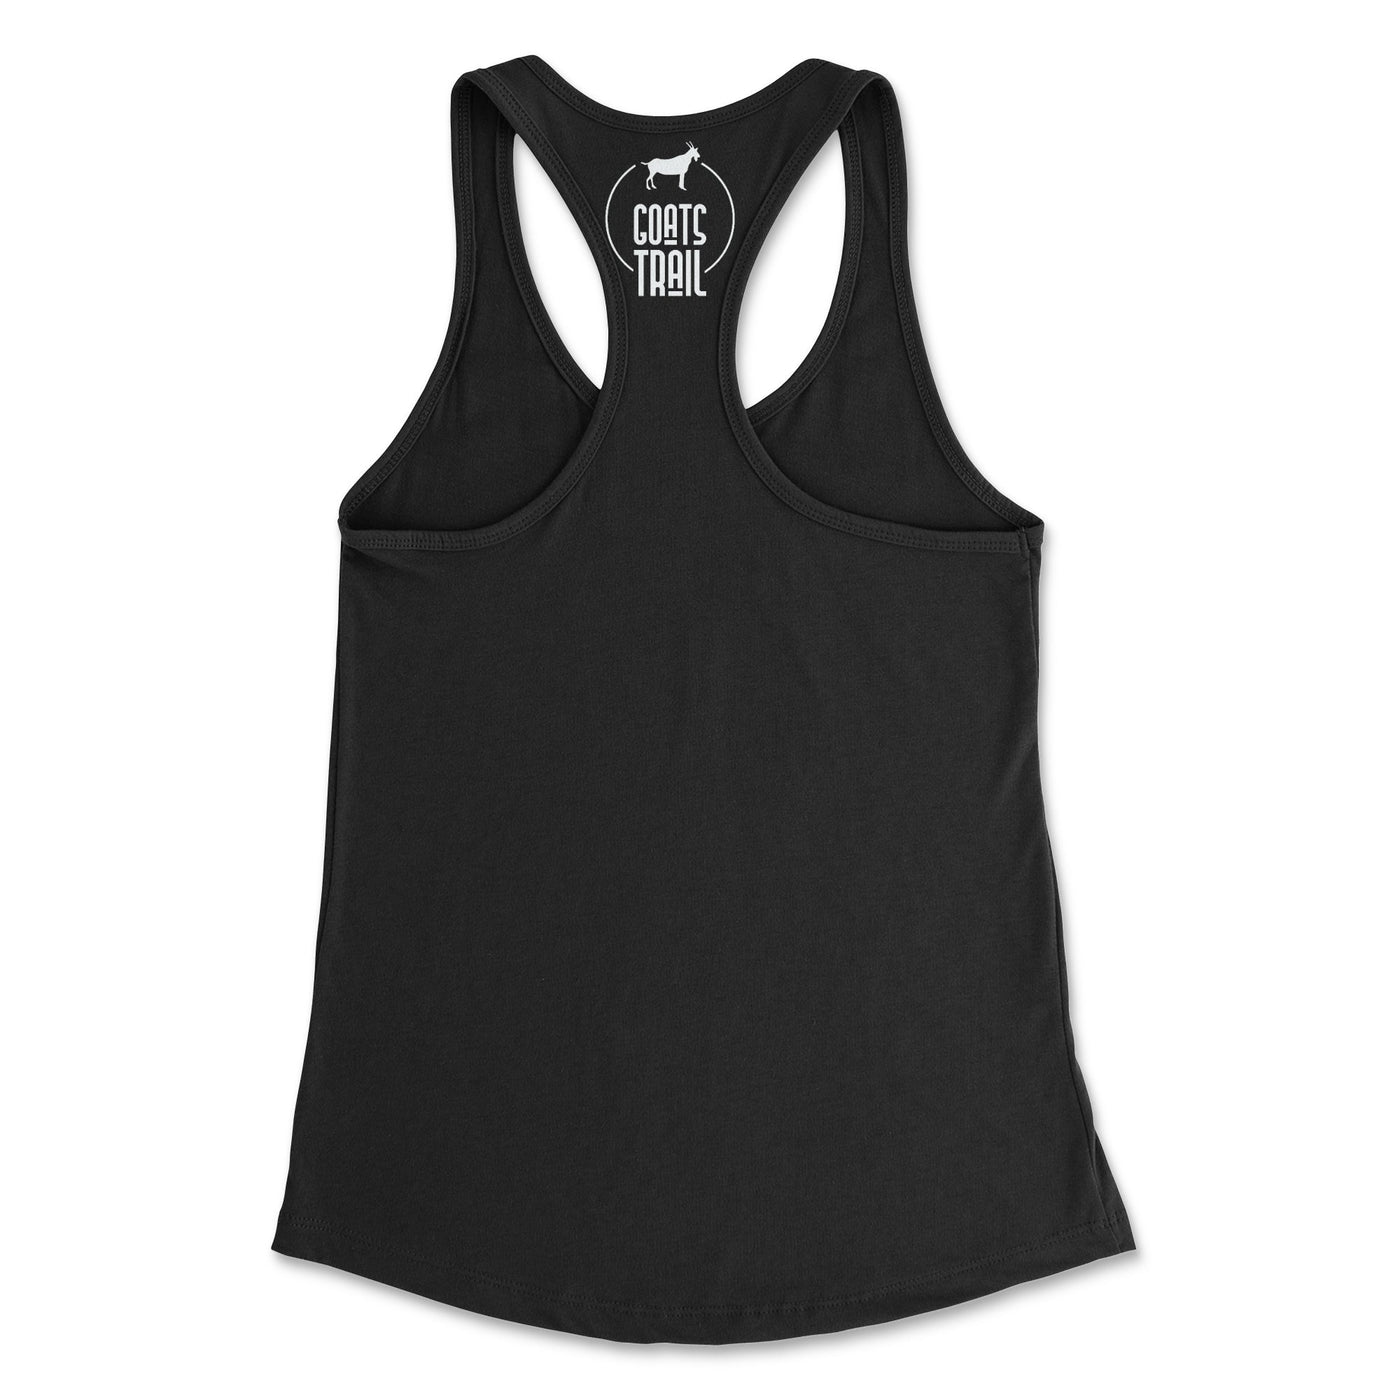 Women's Nature's Heart Black Tank Top - Goats Trail Off-Road Apparel Company